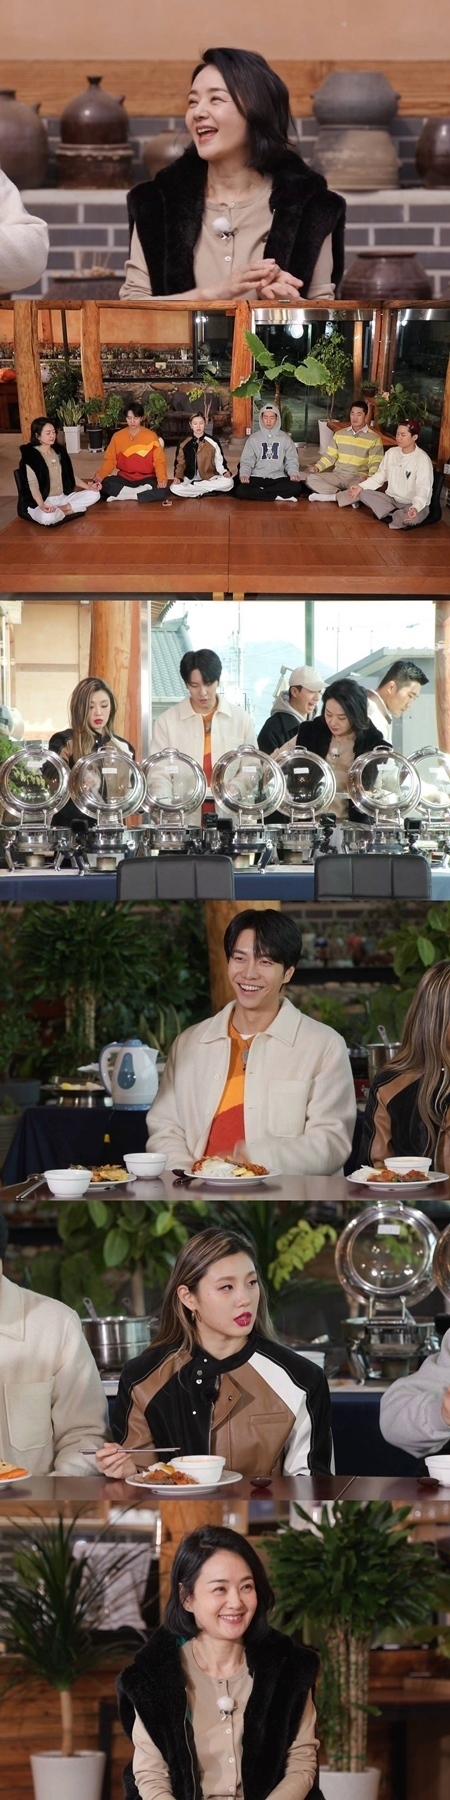 Actor Bae Jong-ok reveals his secrets to self-managementOn SBS All The Butlers, which will be broadcast on March 20, a special day of actor Bae Jong-ok, the end king of self-management, will be released.On the day of the show, actor Bae Jong-ok, who is called Star during the entertainment industry, will appear as master through thorough self-management.Bae Jong-ok was born in 1964 and despite his age of 59 this year, he showed the beauty of the ultra-strong preservative, which has not changed from his twenties.The secret of preservative beauty is to try to overcome the shortcomings steadily.Bae Jong-ok reveals her own secrets of luxury management, from making lemon honey packs that transform her from troubled skin to white skin to special meditation to look into her mind.